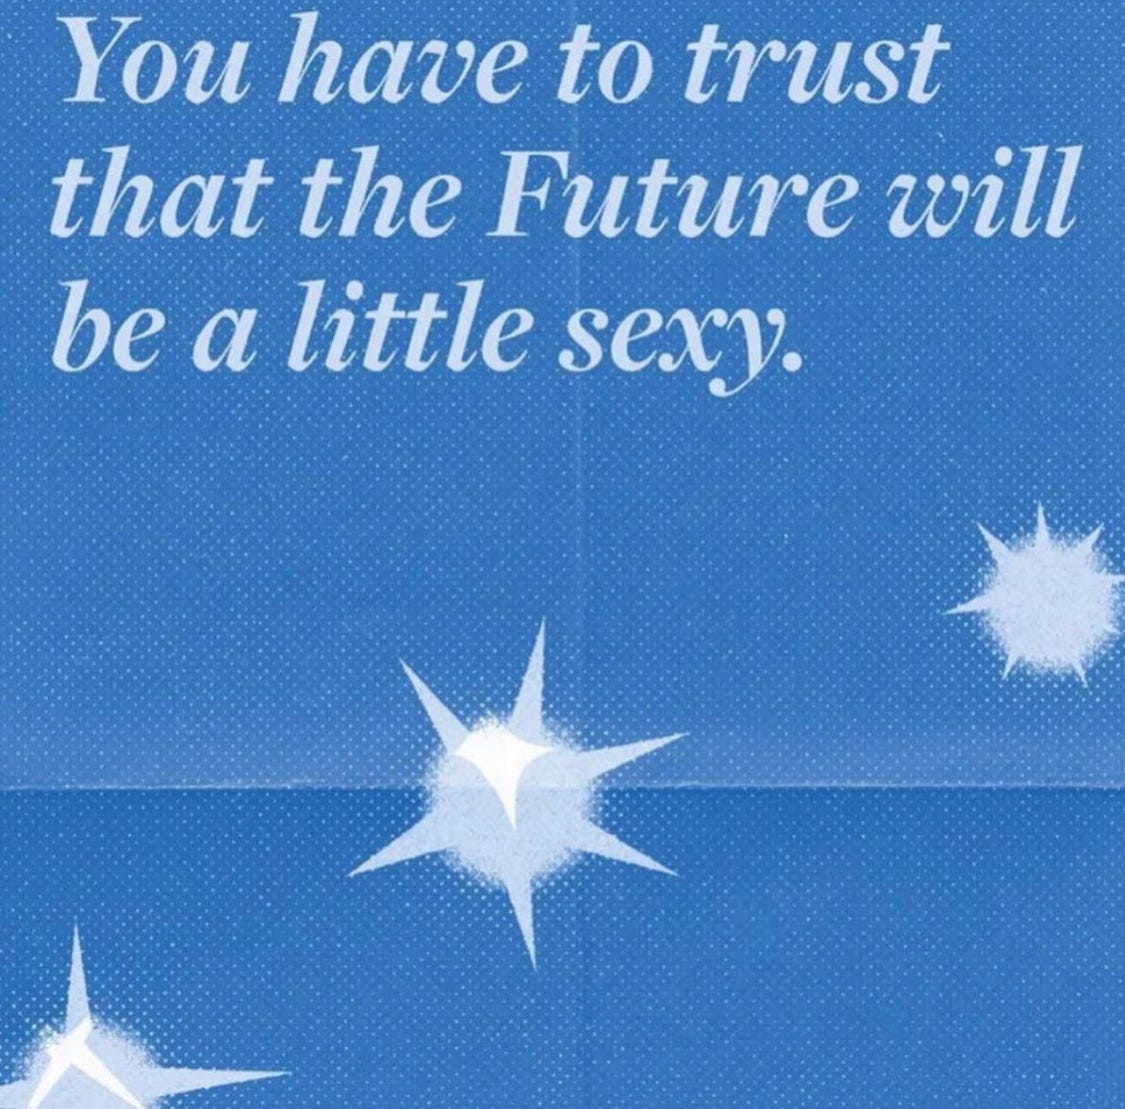 'You have to trust that the Future will be a little sexy.'